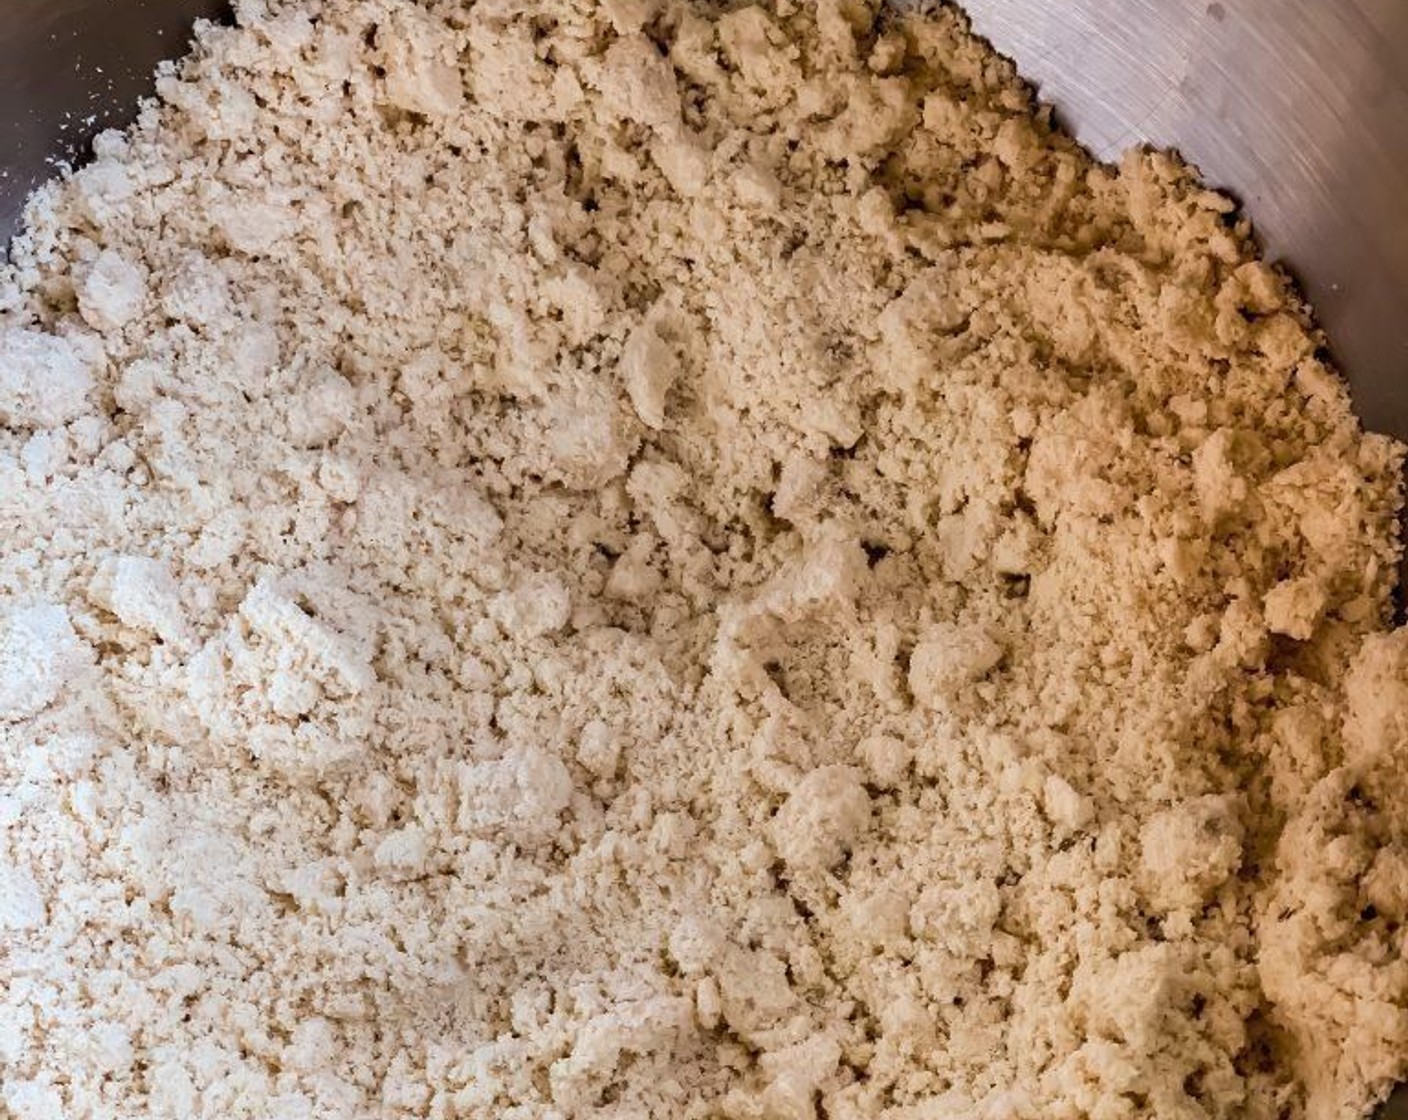 step 1 Take a large bowl and add Whole Wheat Flour (1 cup), All-Purpose Flour (1 cup), Almond Flour (1/2 cup), Ajwain Seeds (1 tsp), Salt (1 tsp) and Oil (1/4 cup).